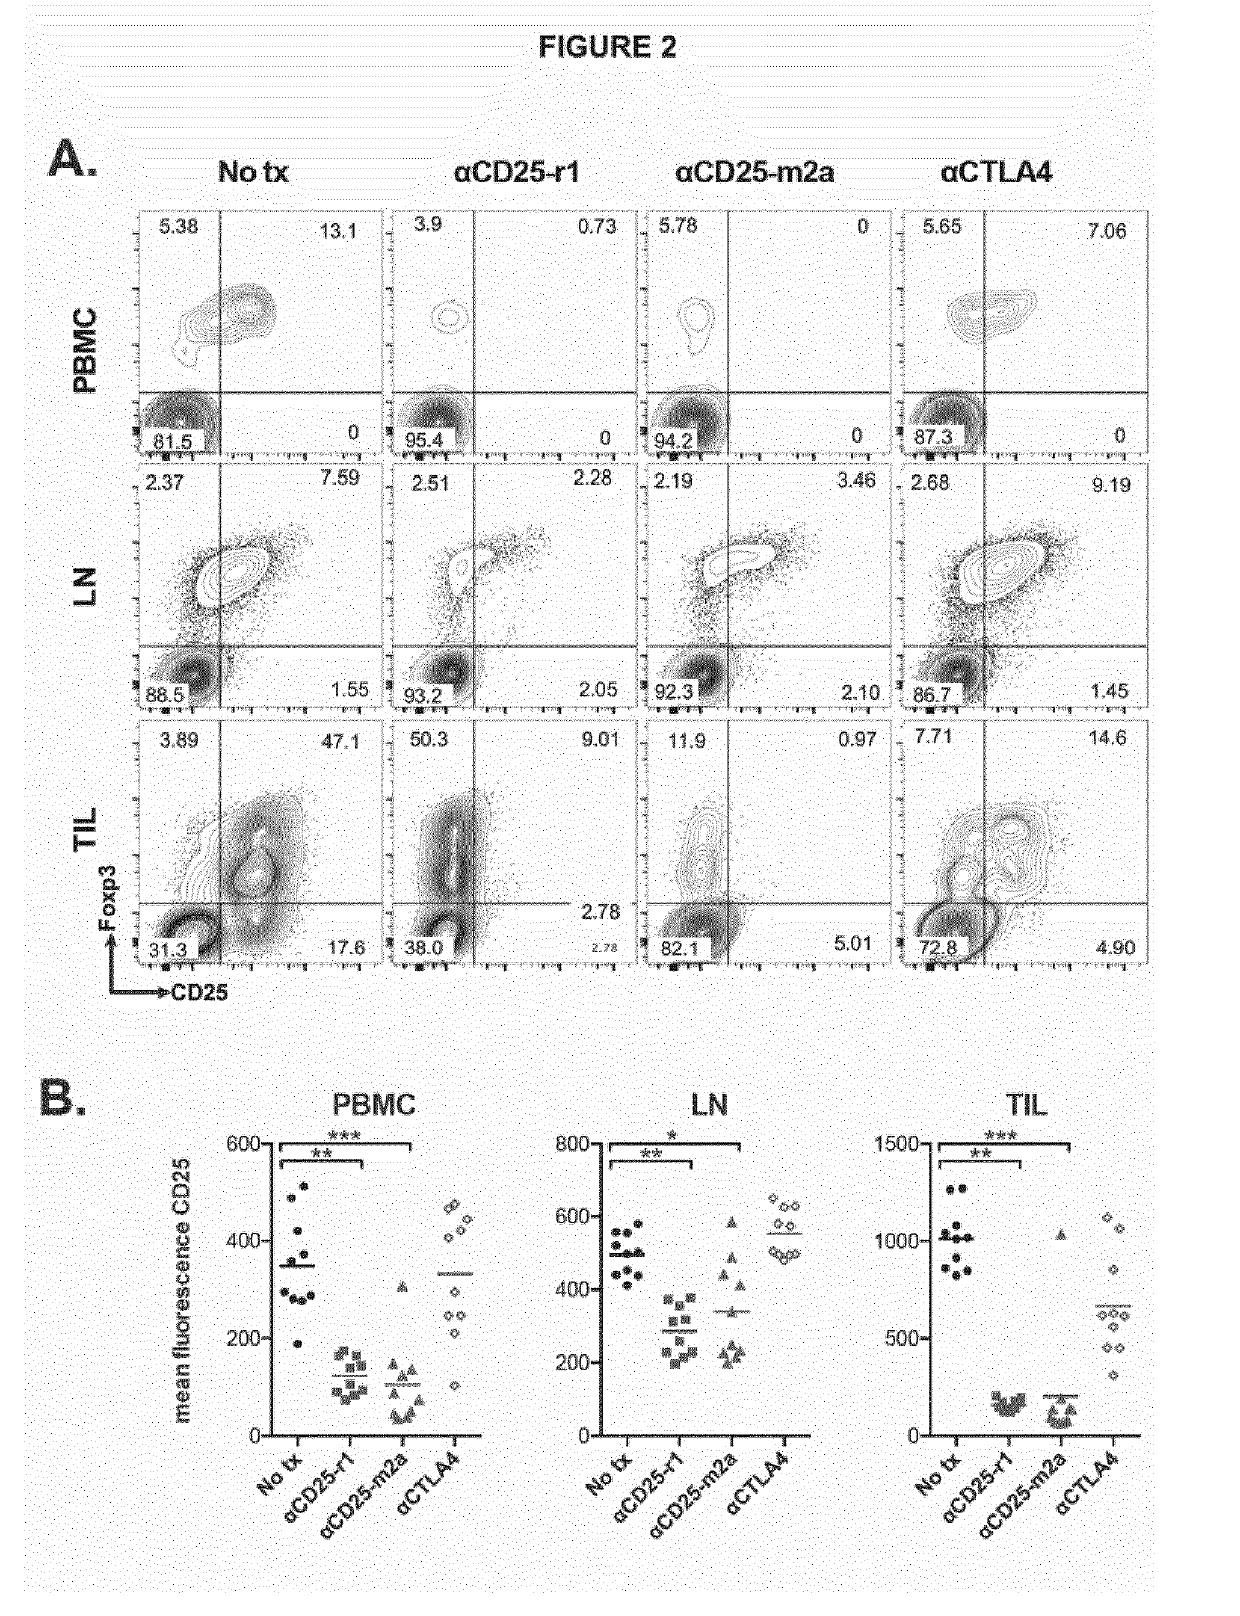 Anti cd25 fc gamma receptor bispecific antibodies for tumor specific cell depletion